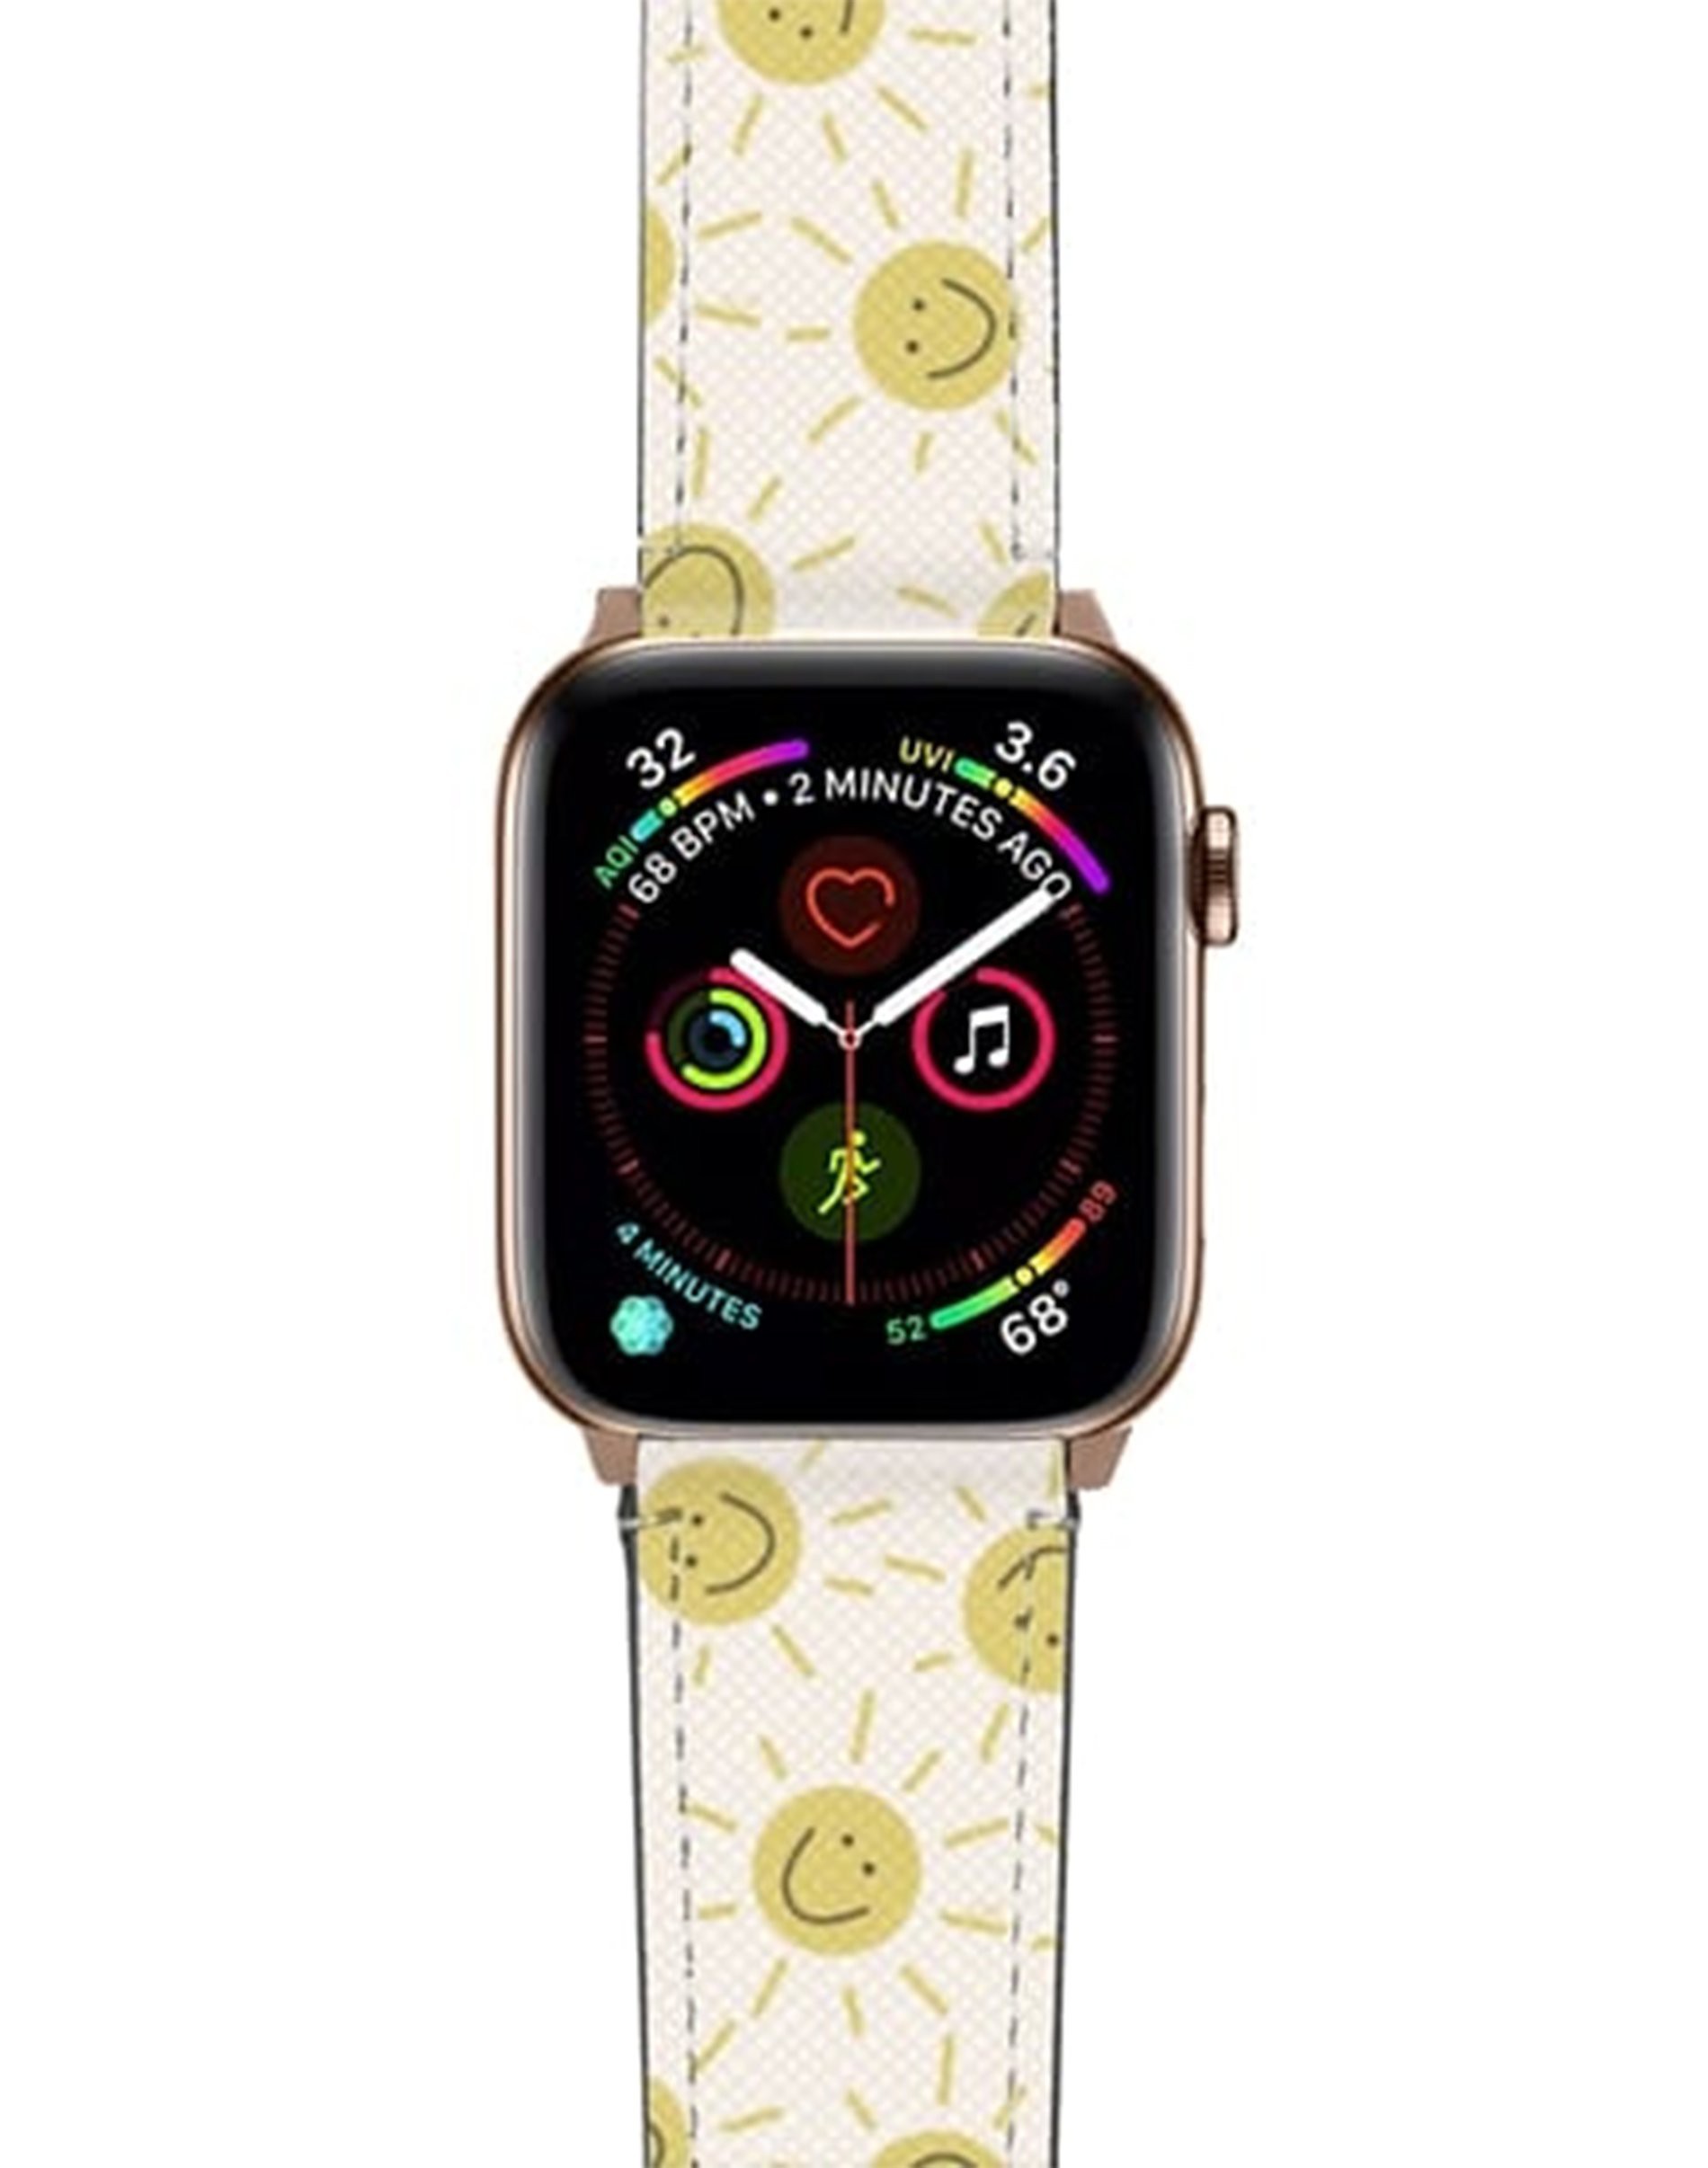 Sunshine Apple Watch Band by Casetify